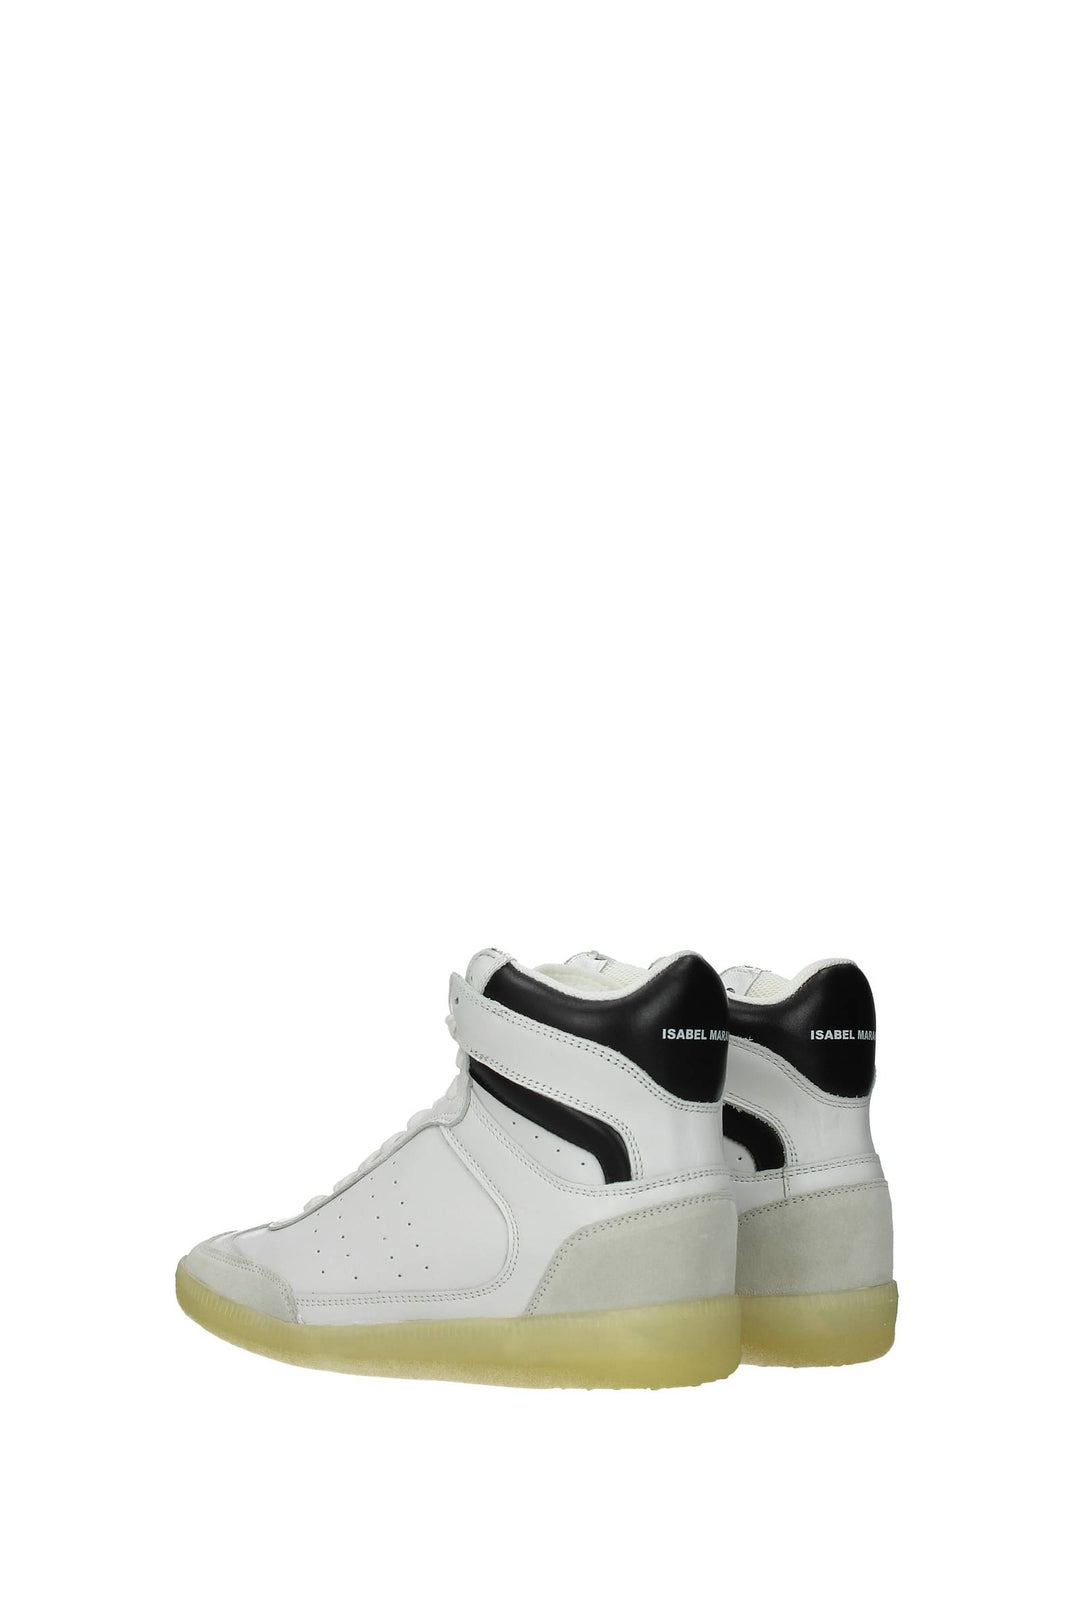 Sneakers Pelle Bianco Nero - Isabel Marant - Donna